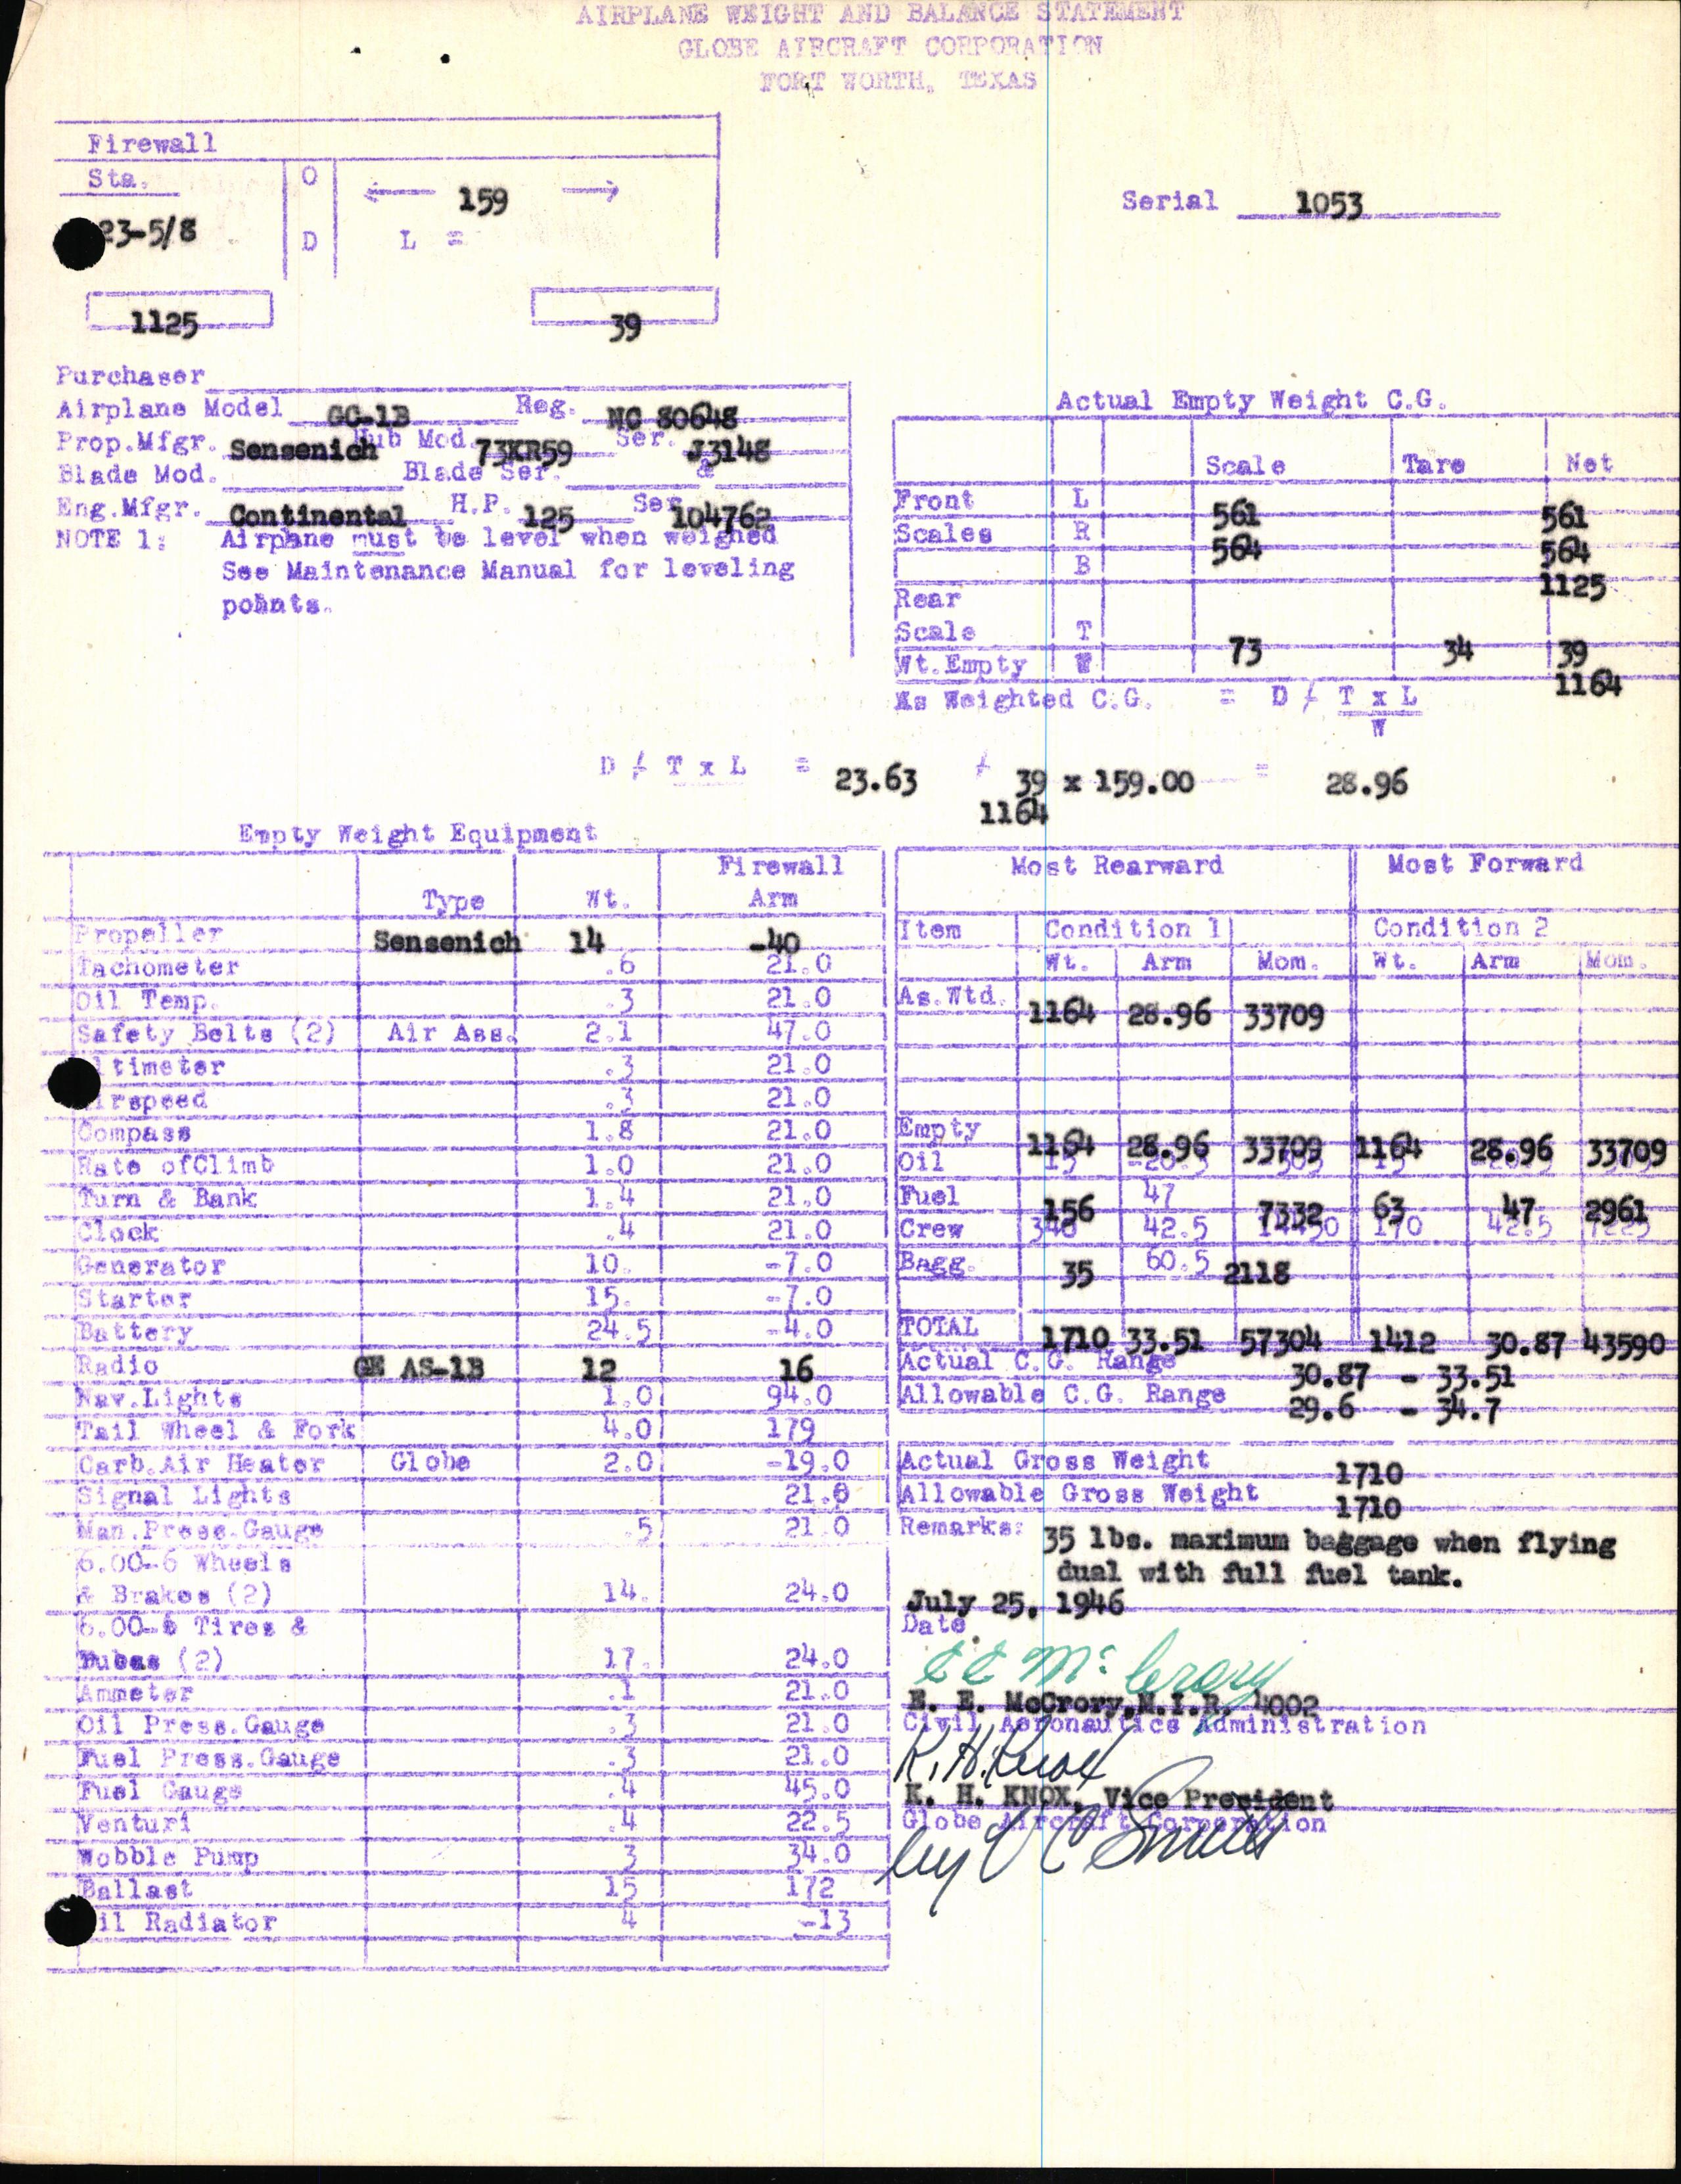 Sample page 7 from AirCorps Library document: Technical Information for Serial Number 1053